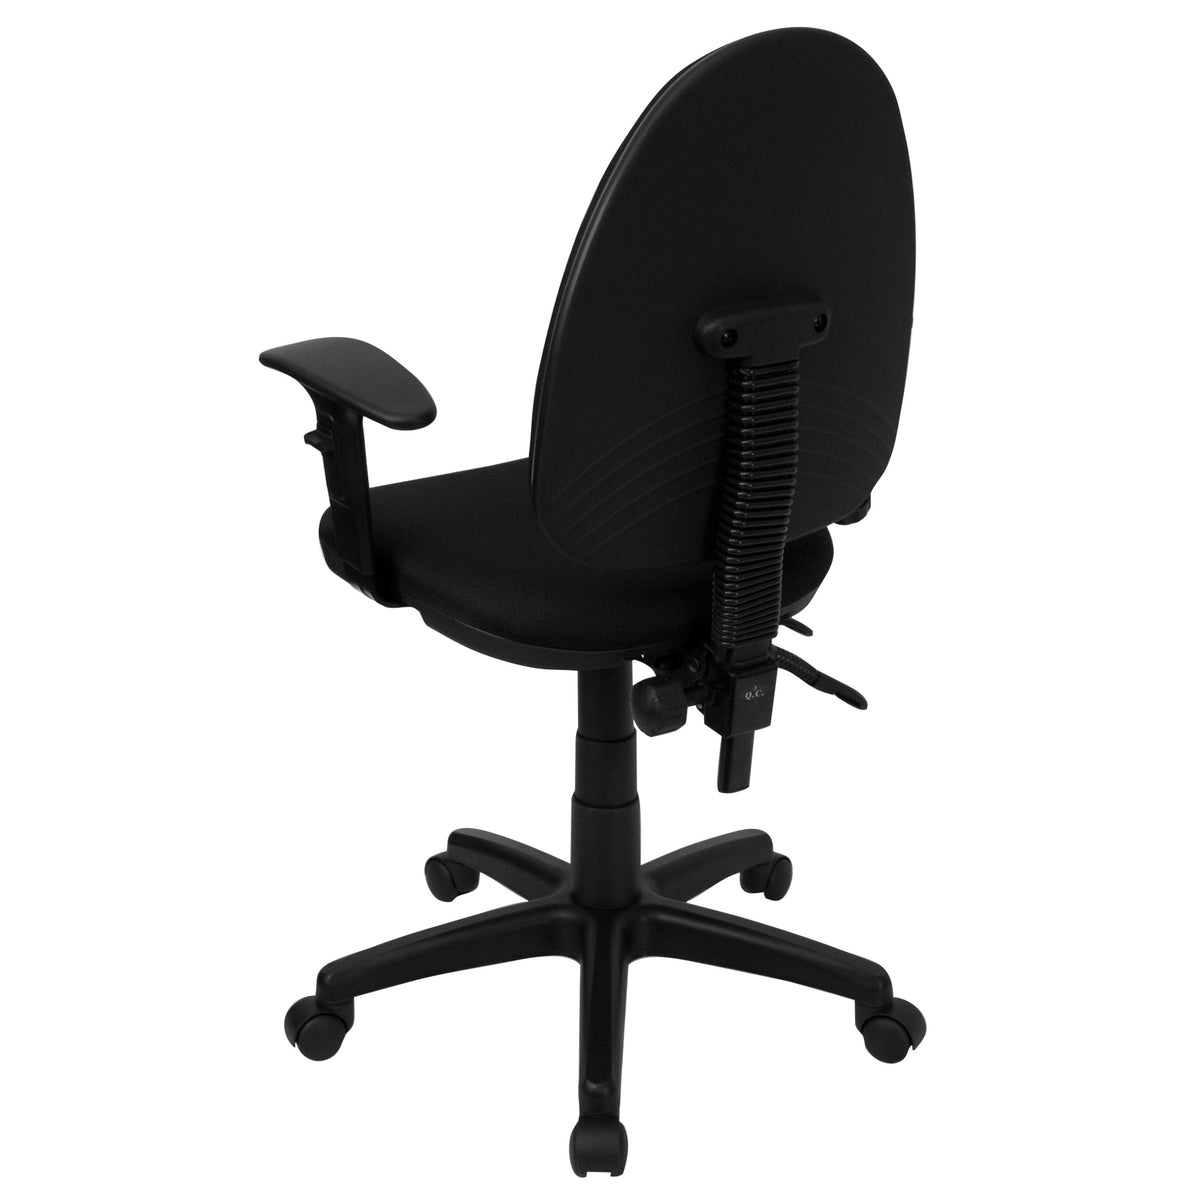 Black |#| Mid-Back Black Fabric Multifunction Swivel Ergonomic Task Office Chair with Arms